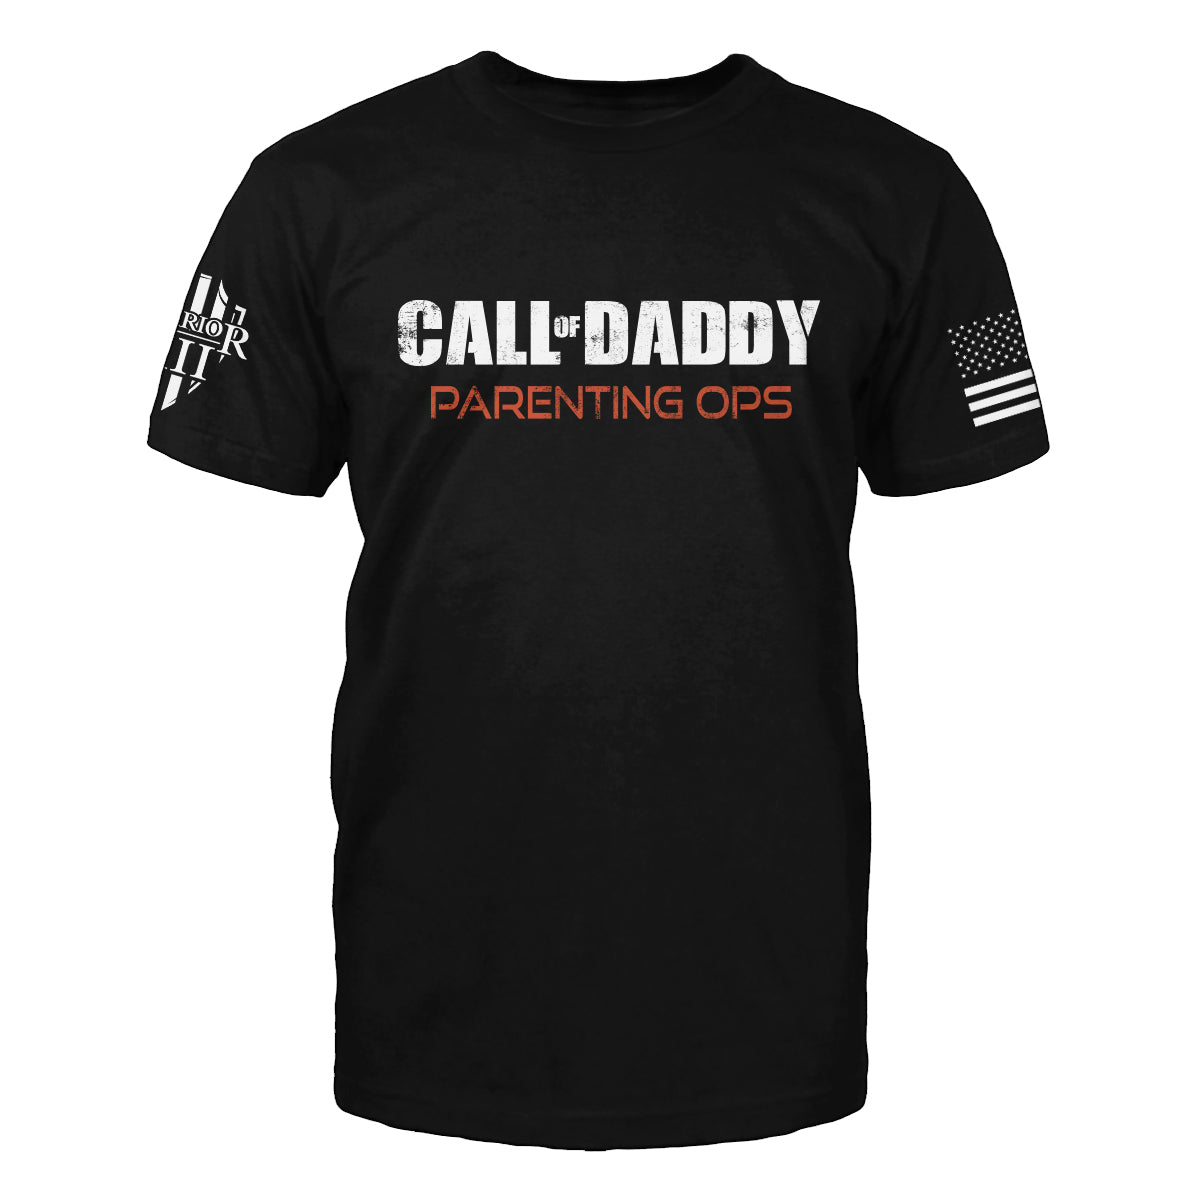 "Call Of Daddy" is printed on a black t-shirt with the main design printed on the front and the back of this t-shirt has no printing. This shirt features our brand logo on the right sleeve and the American Flag on the left sleeve.